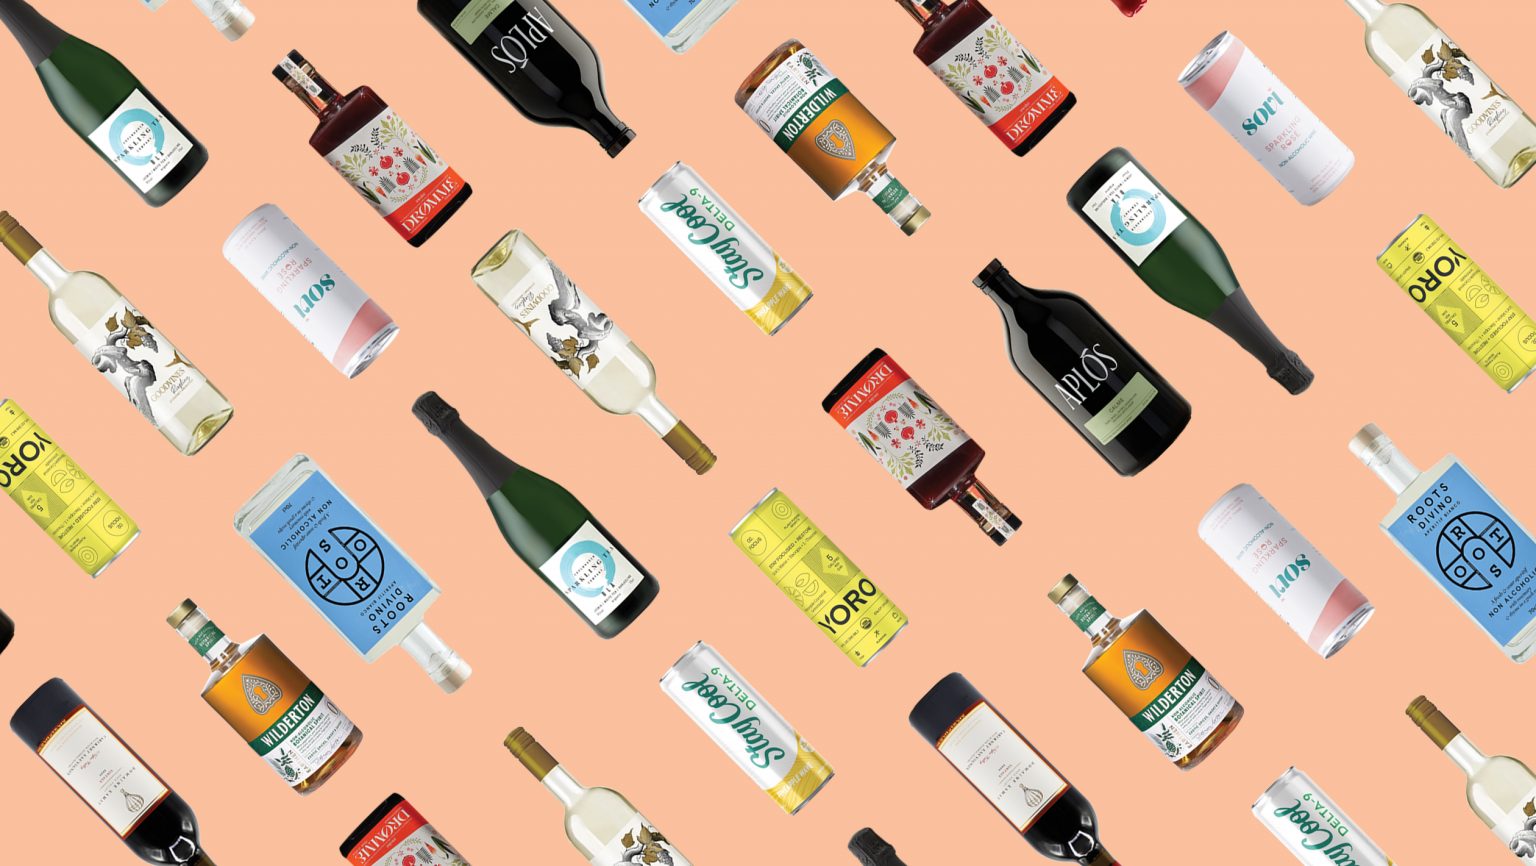 The 10 Best Non-Alcoholic Drinks, According to Retailers